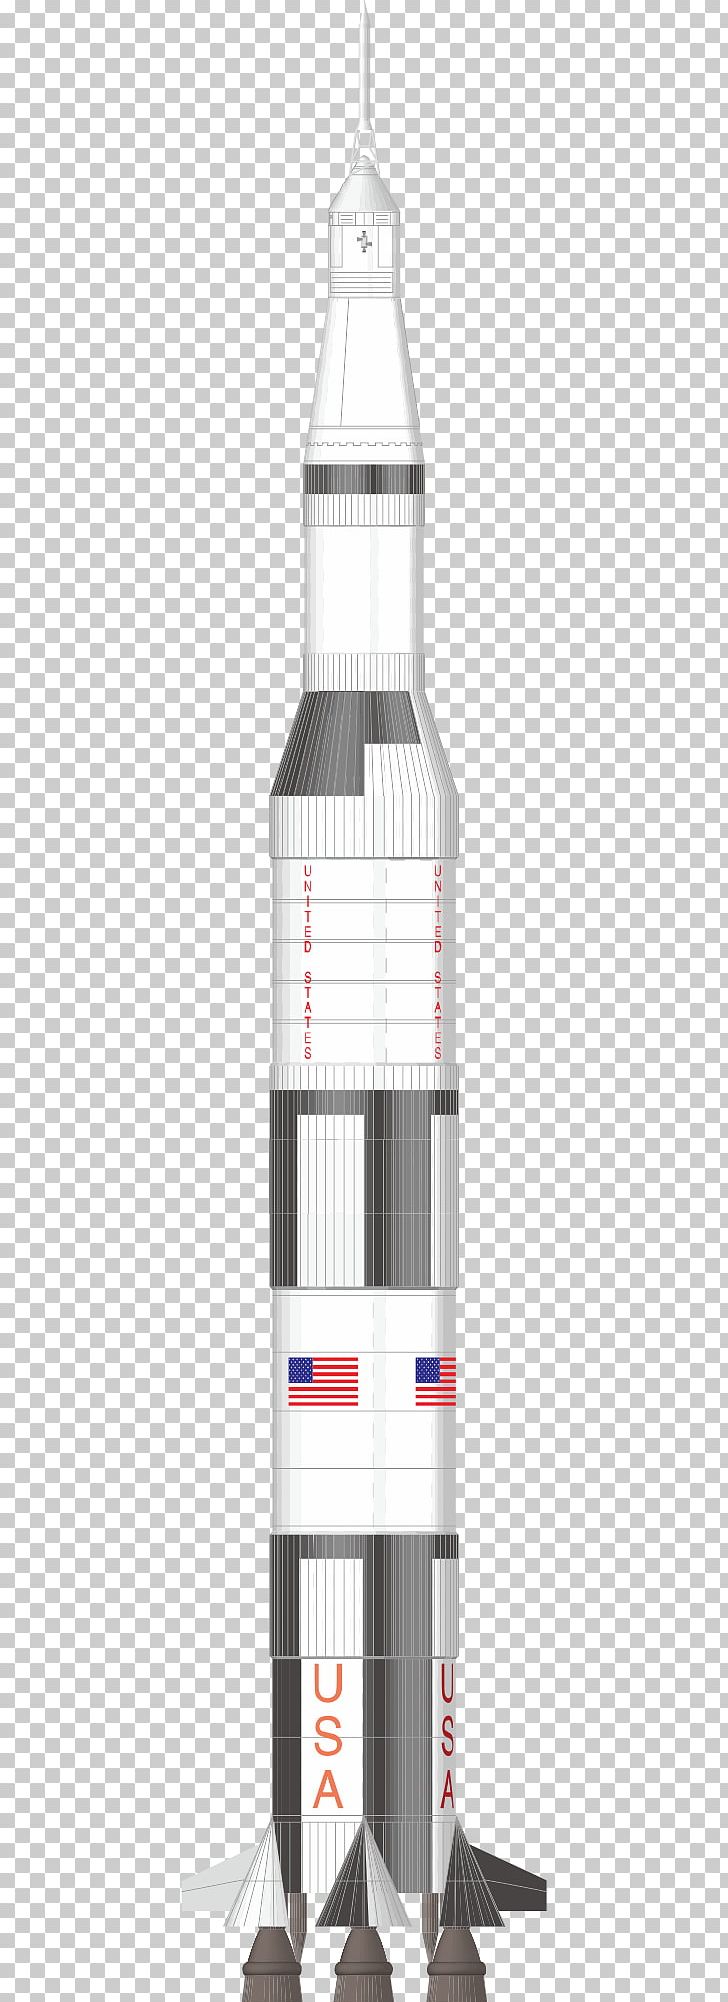 Apollo Program Space Shuttle Program Saturn V Shuttle-Derived Launch Vehicle PNG, Clipart, Airship, Ares I, Ares V, Astronaut, Cargo Ship Free PNG Download